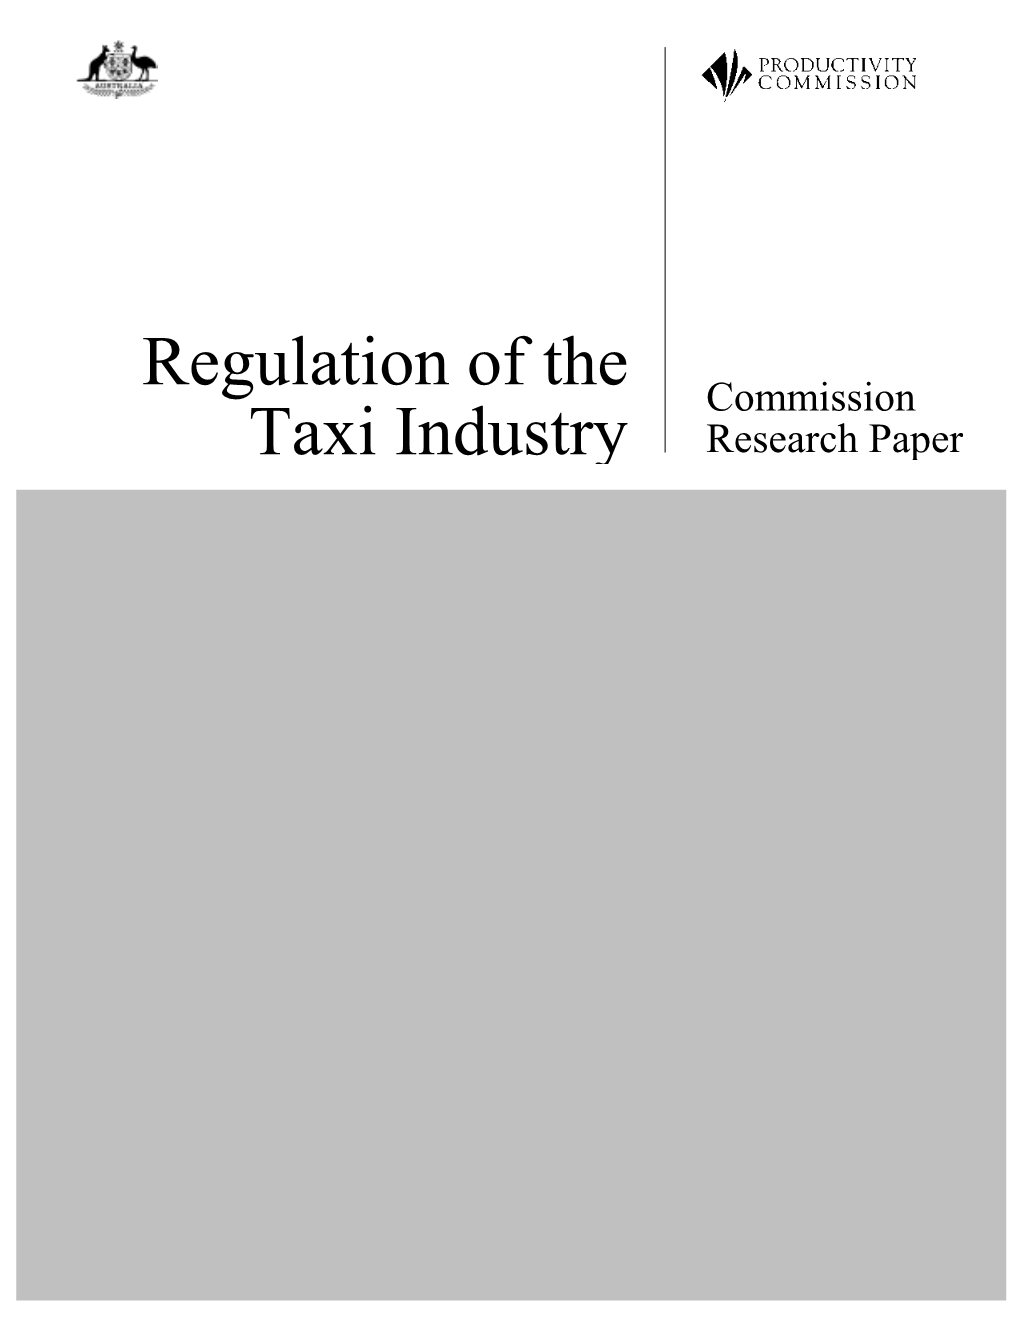 Regulation of the Taxi Industry, Ausinfo, Canberra